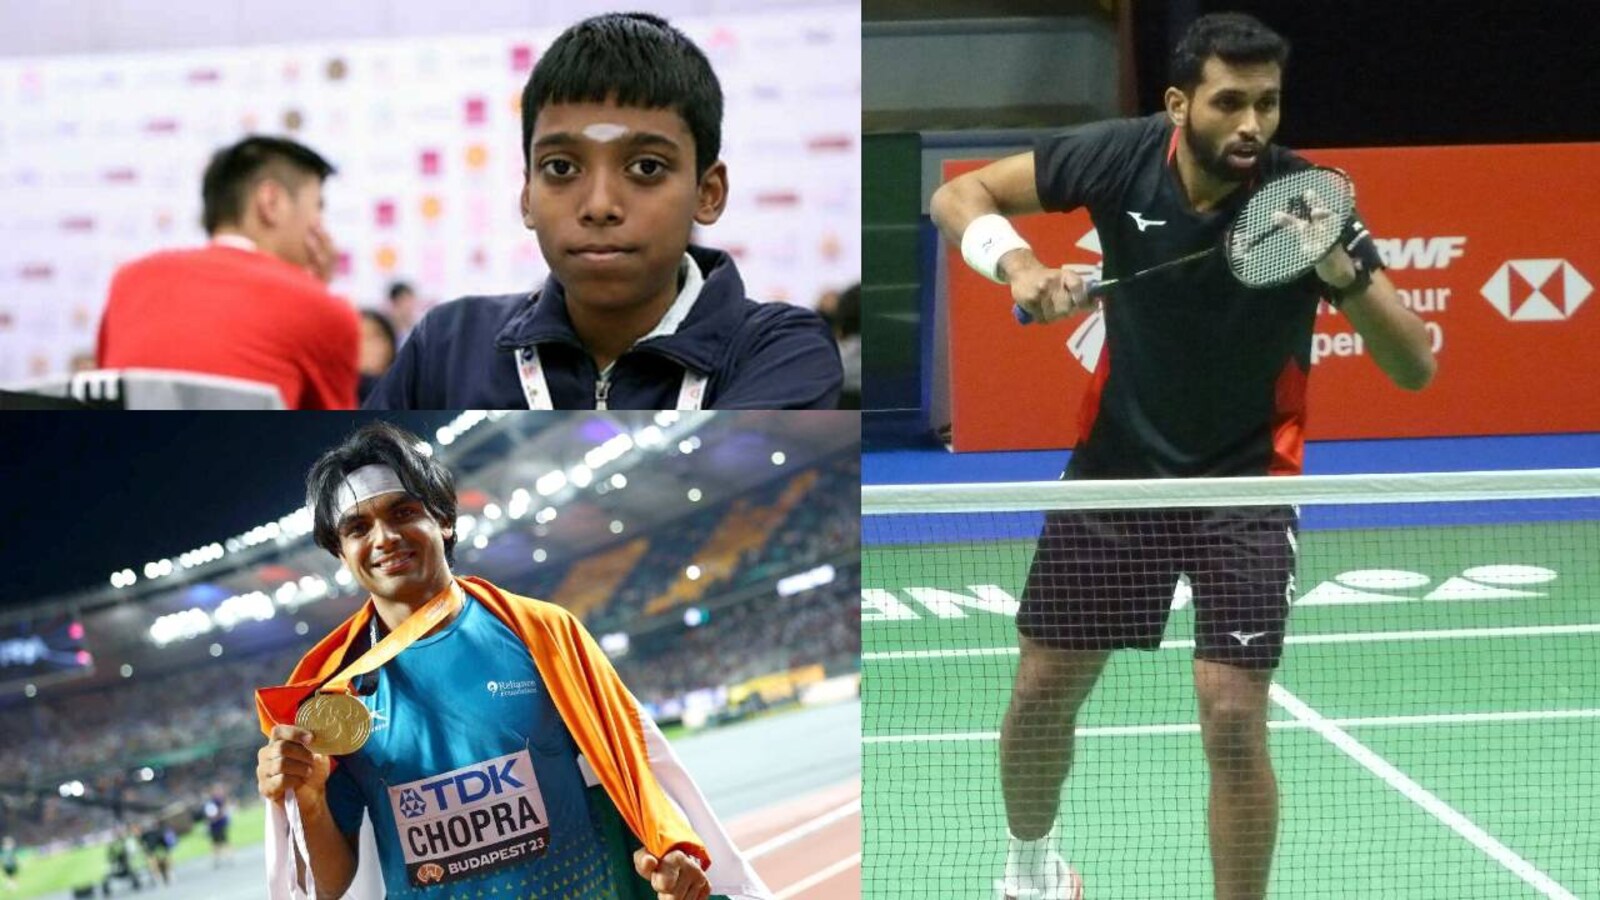 D Gukesh enters Top 10 World Rankings in live ratings. He is only